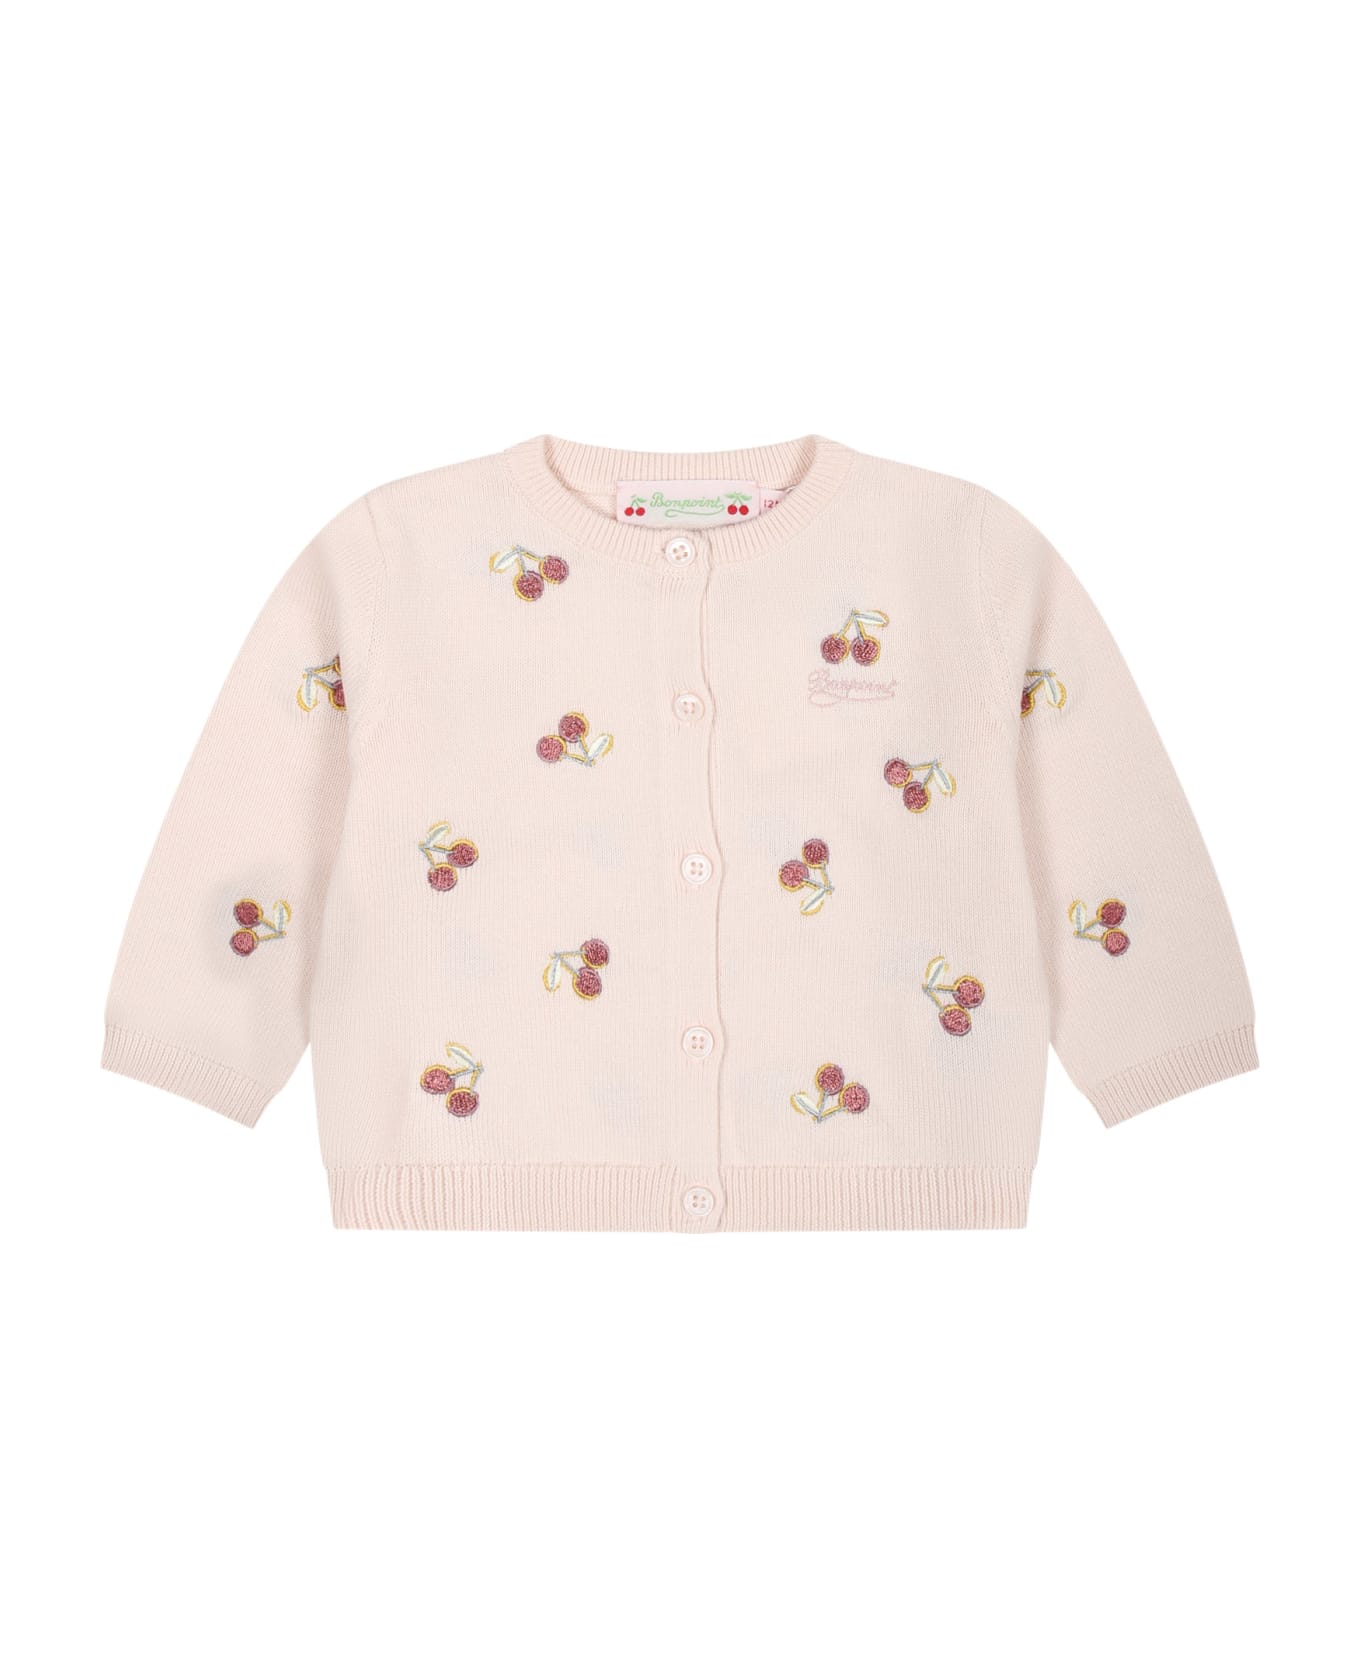 Bonpoint Pink Cardigan For Baby Girl With Cherries - Pink